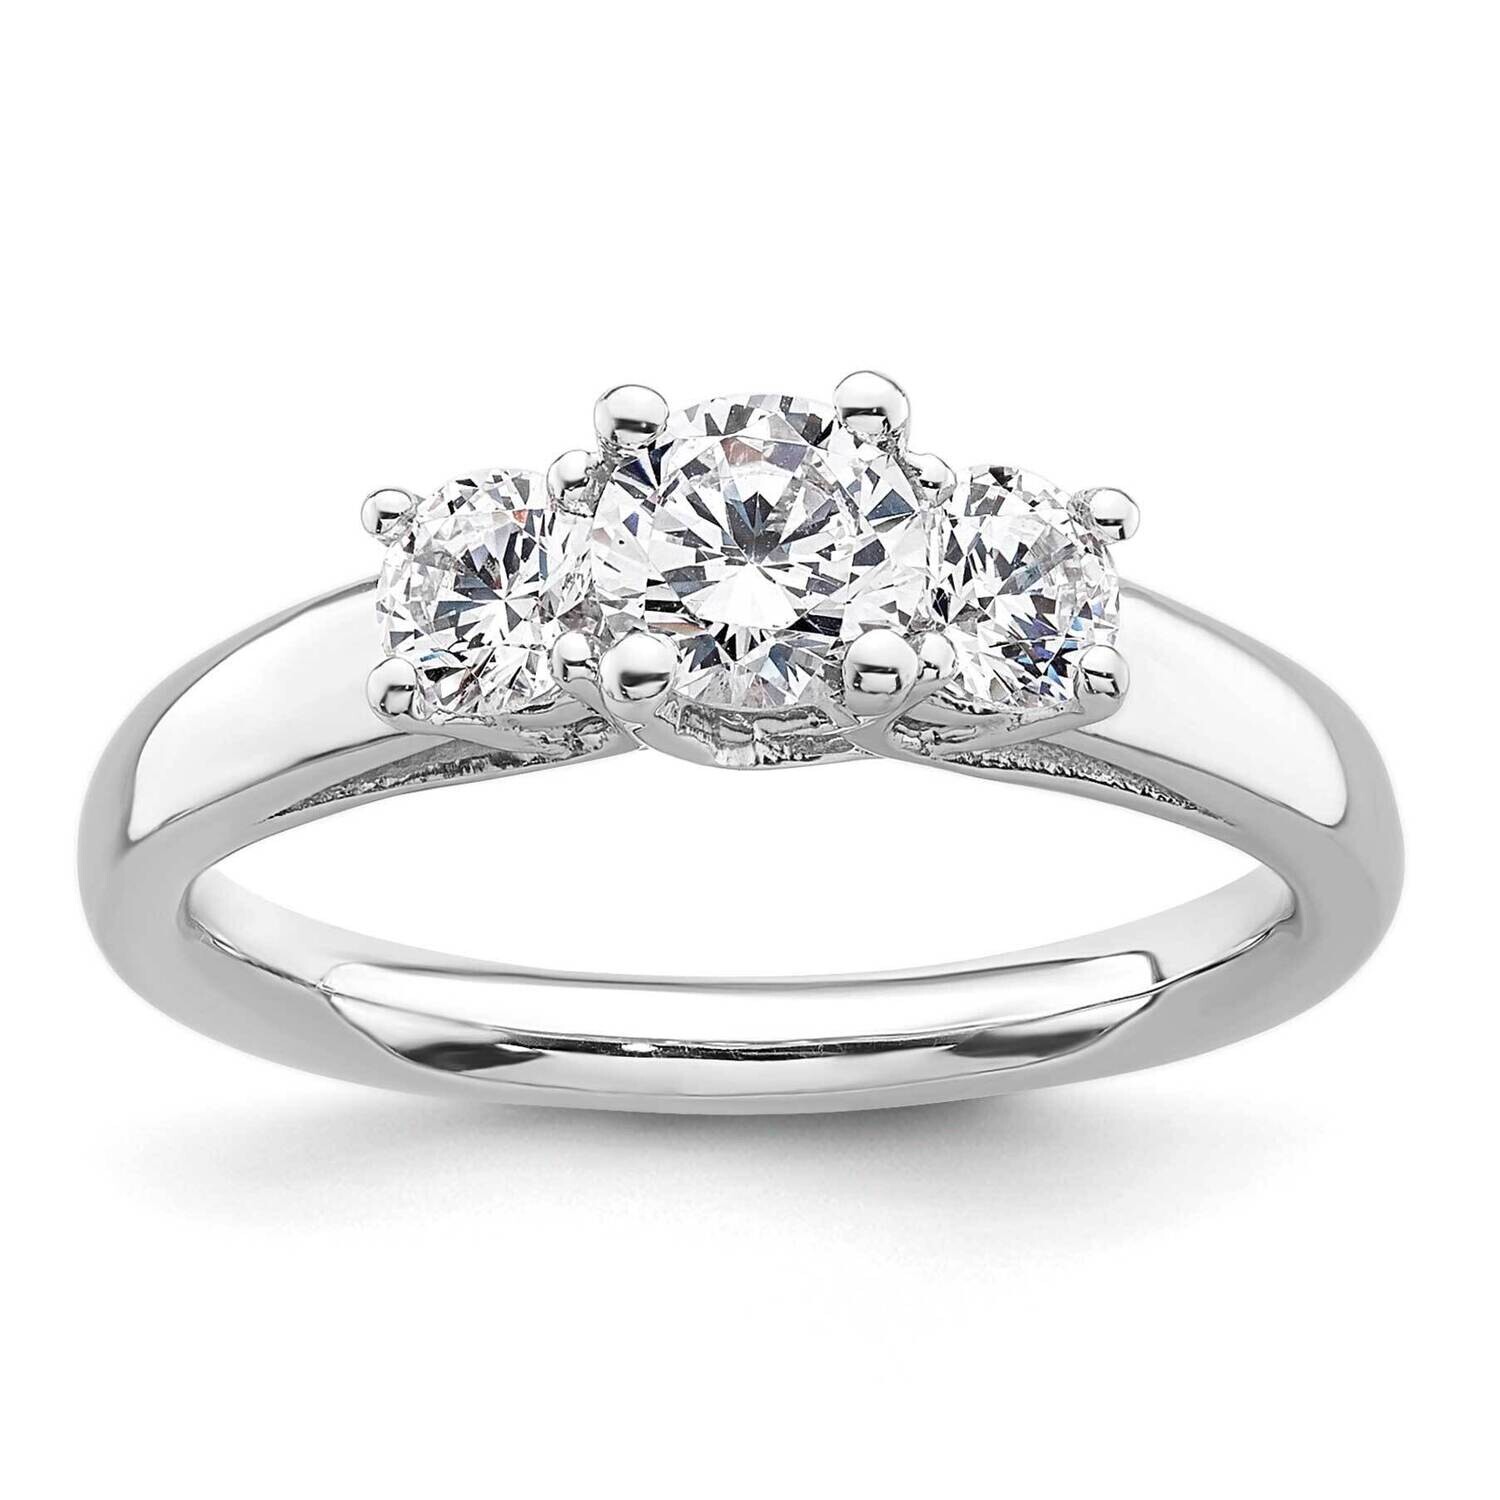 3-Stone Holds 1/2 Carat 5.2mm Round Center 2-4.1mm Round Sides Engagement Ring Mounting 14k White Gold RM2955E-050-CWAA